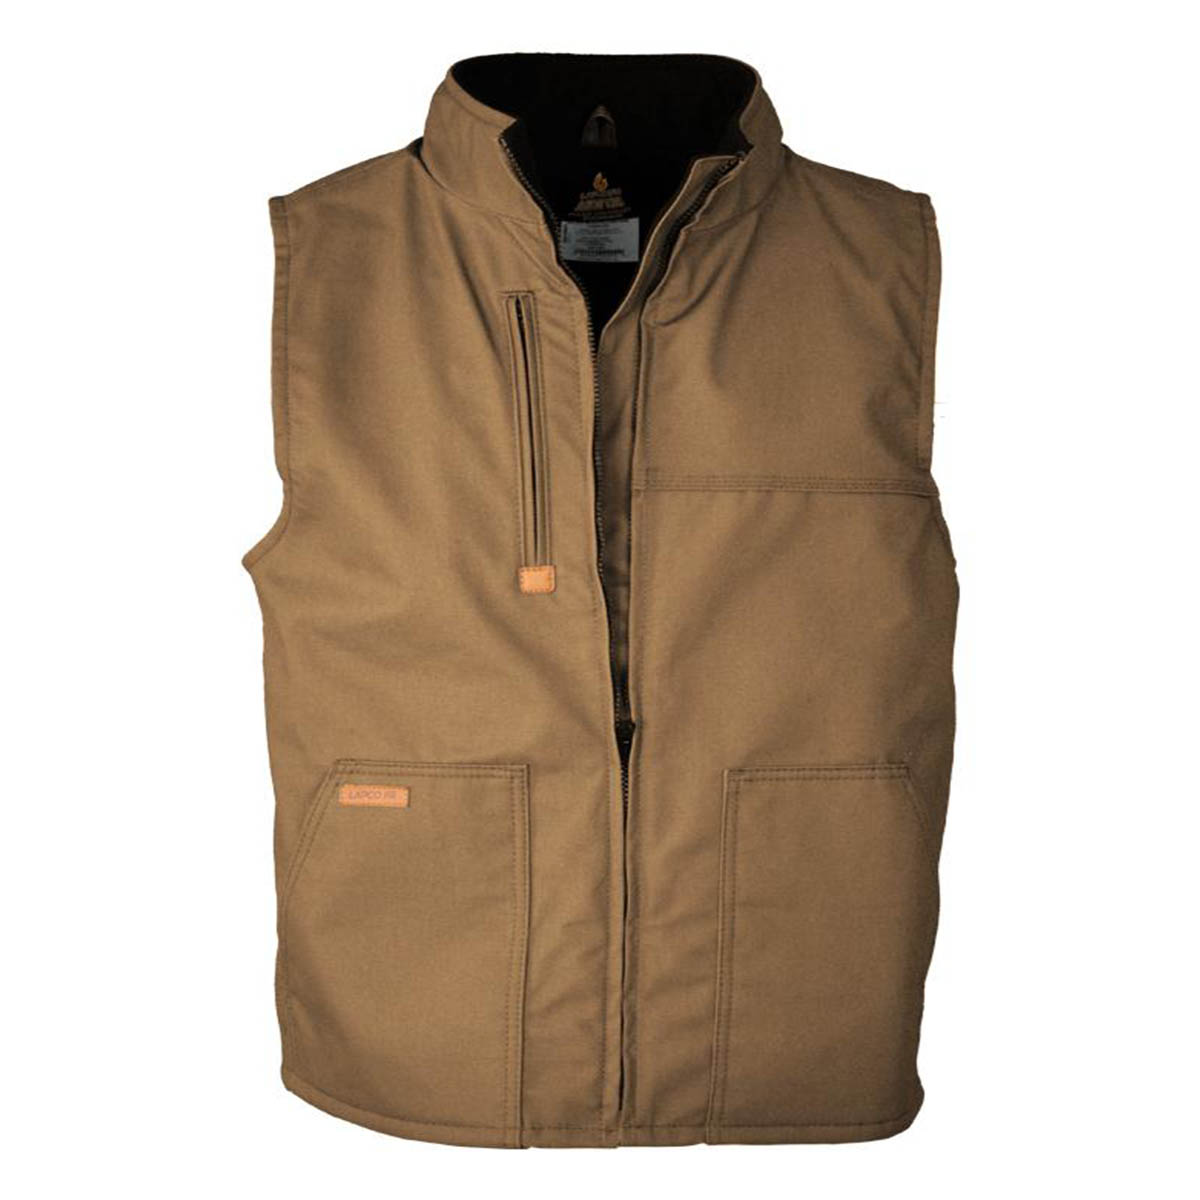 LAPCO FR Fleece Lined Vest with Windshield Technology in Brown